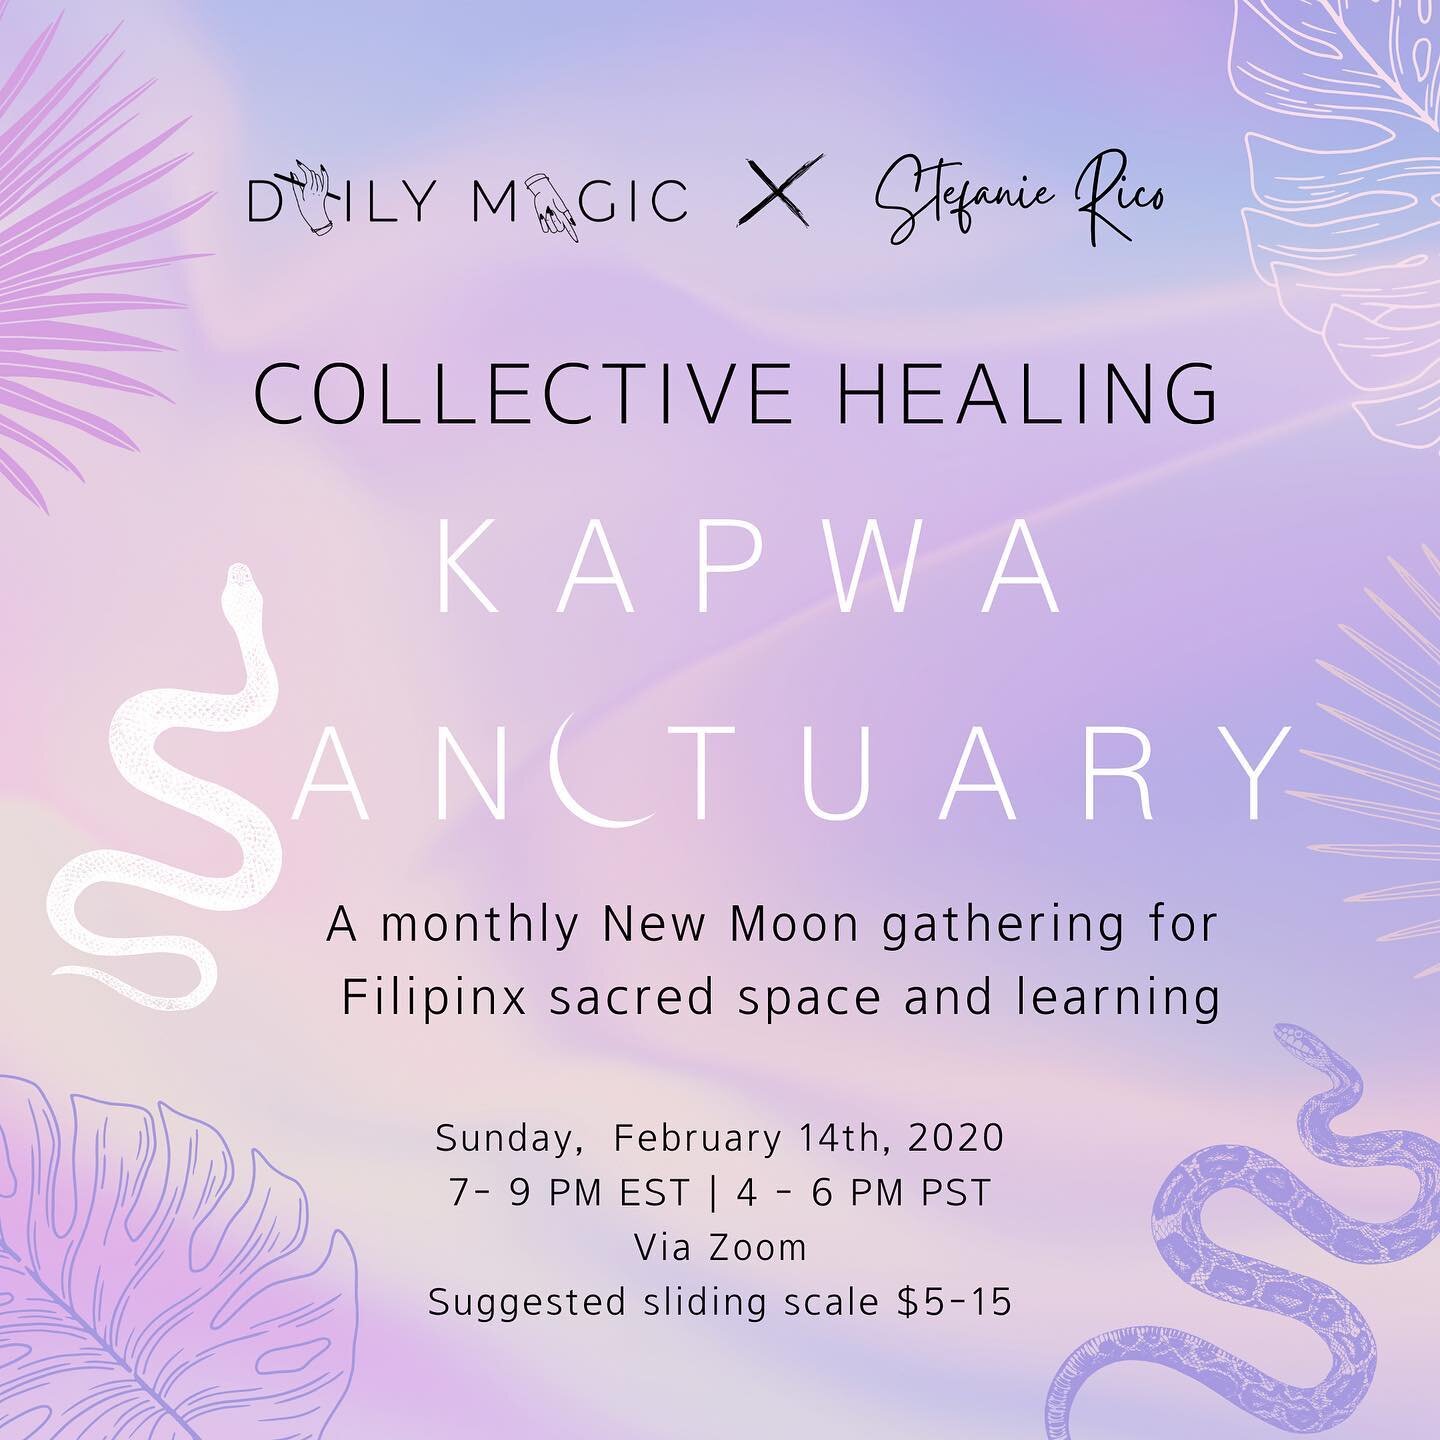 This month we&rsquo;re setting up our altars, bathing ourselves in coconut oil, immersing in sound and rediscovering what it means to take care of ourselves and each other. 🌿

For February's Kapwa Sanctuary, we're focusing our energy on COLLECTIVE H